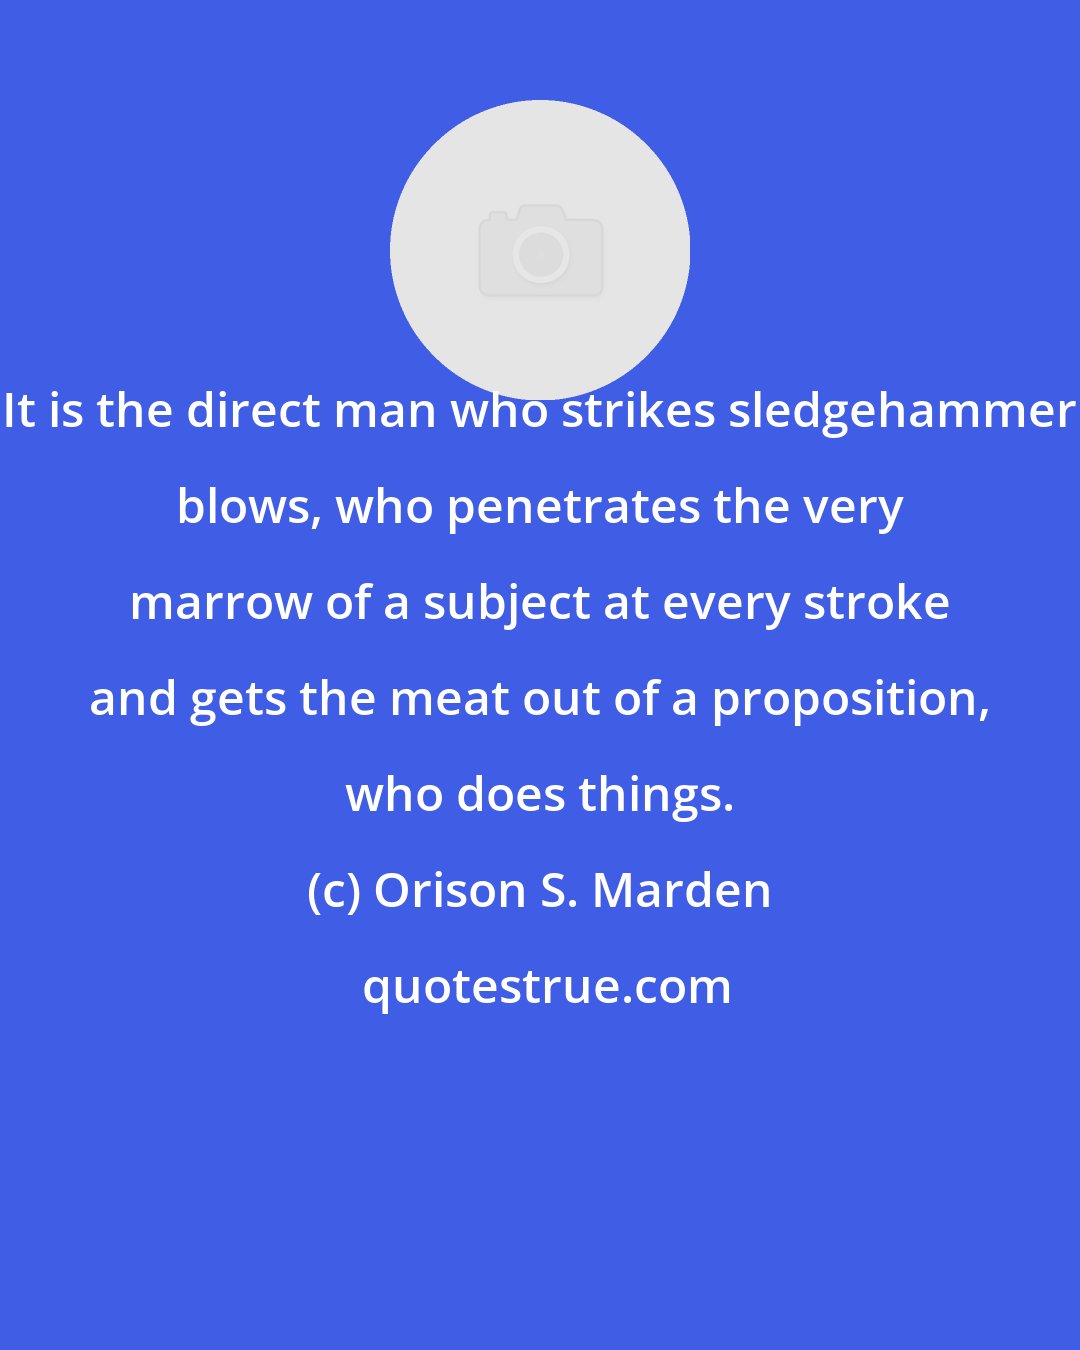 Orison S. Marden: It is the direct man who strikes sledgehammer blows, who penetrates the very marrow of a subject at every stroke and gets the meat out of a proposition, who does things.